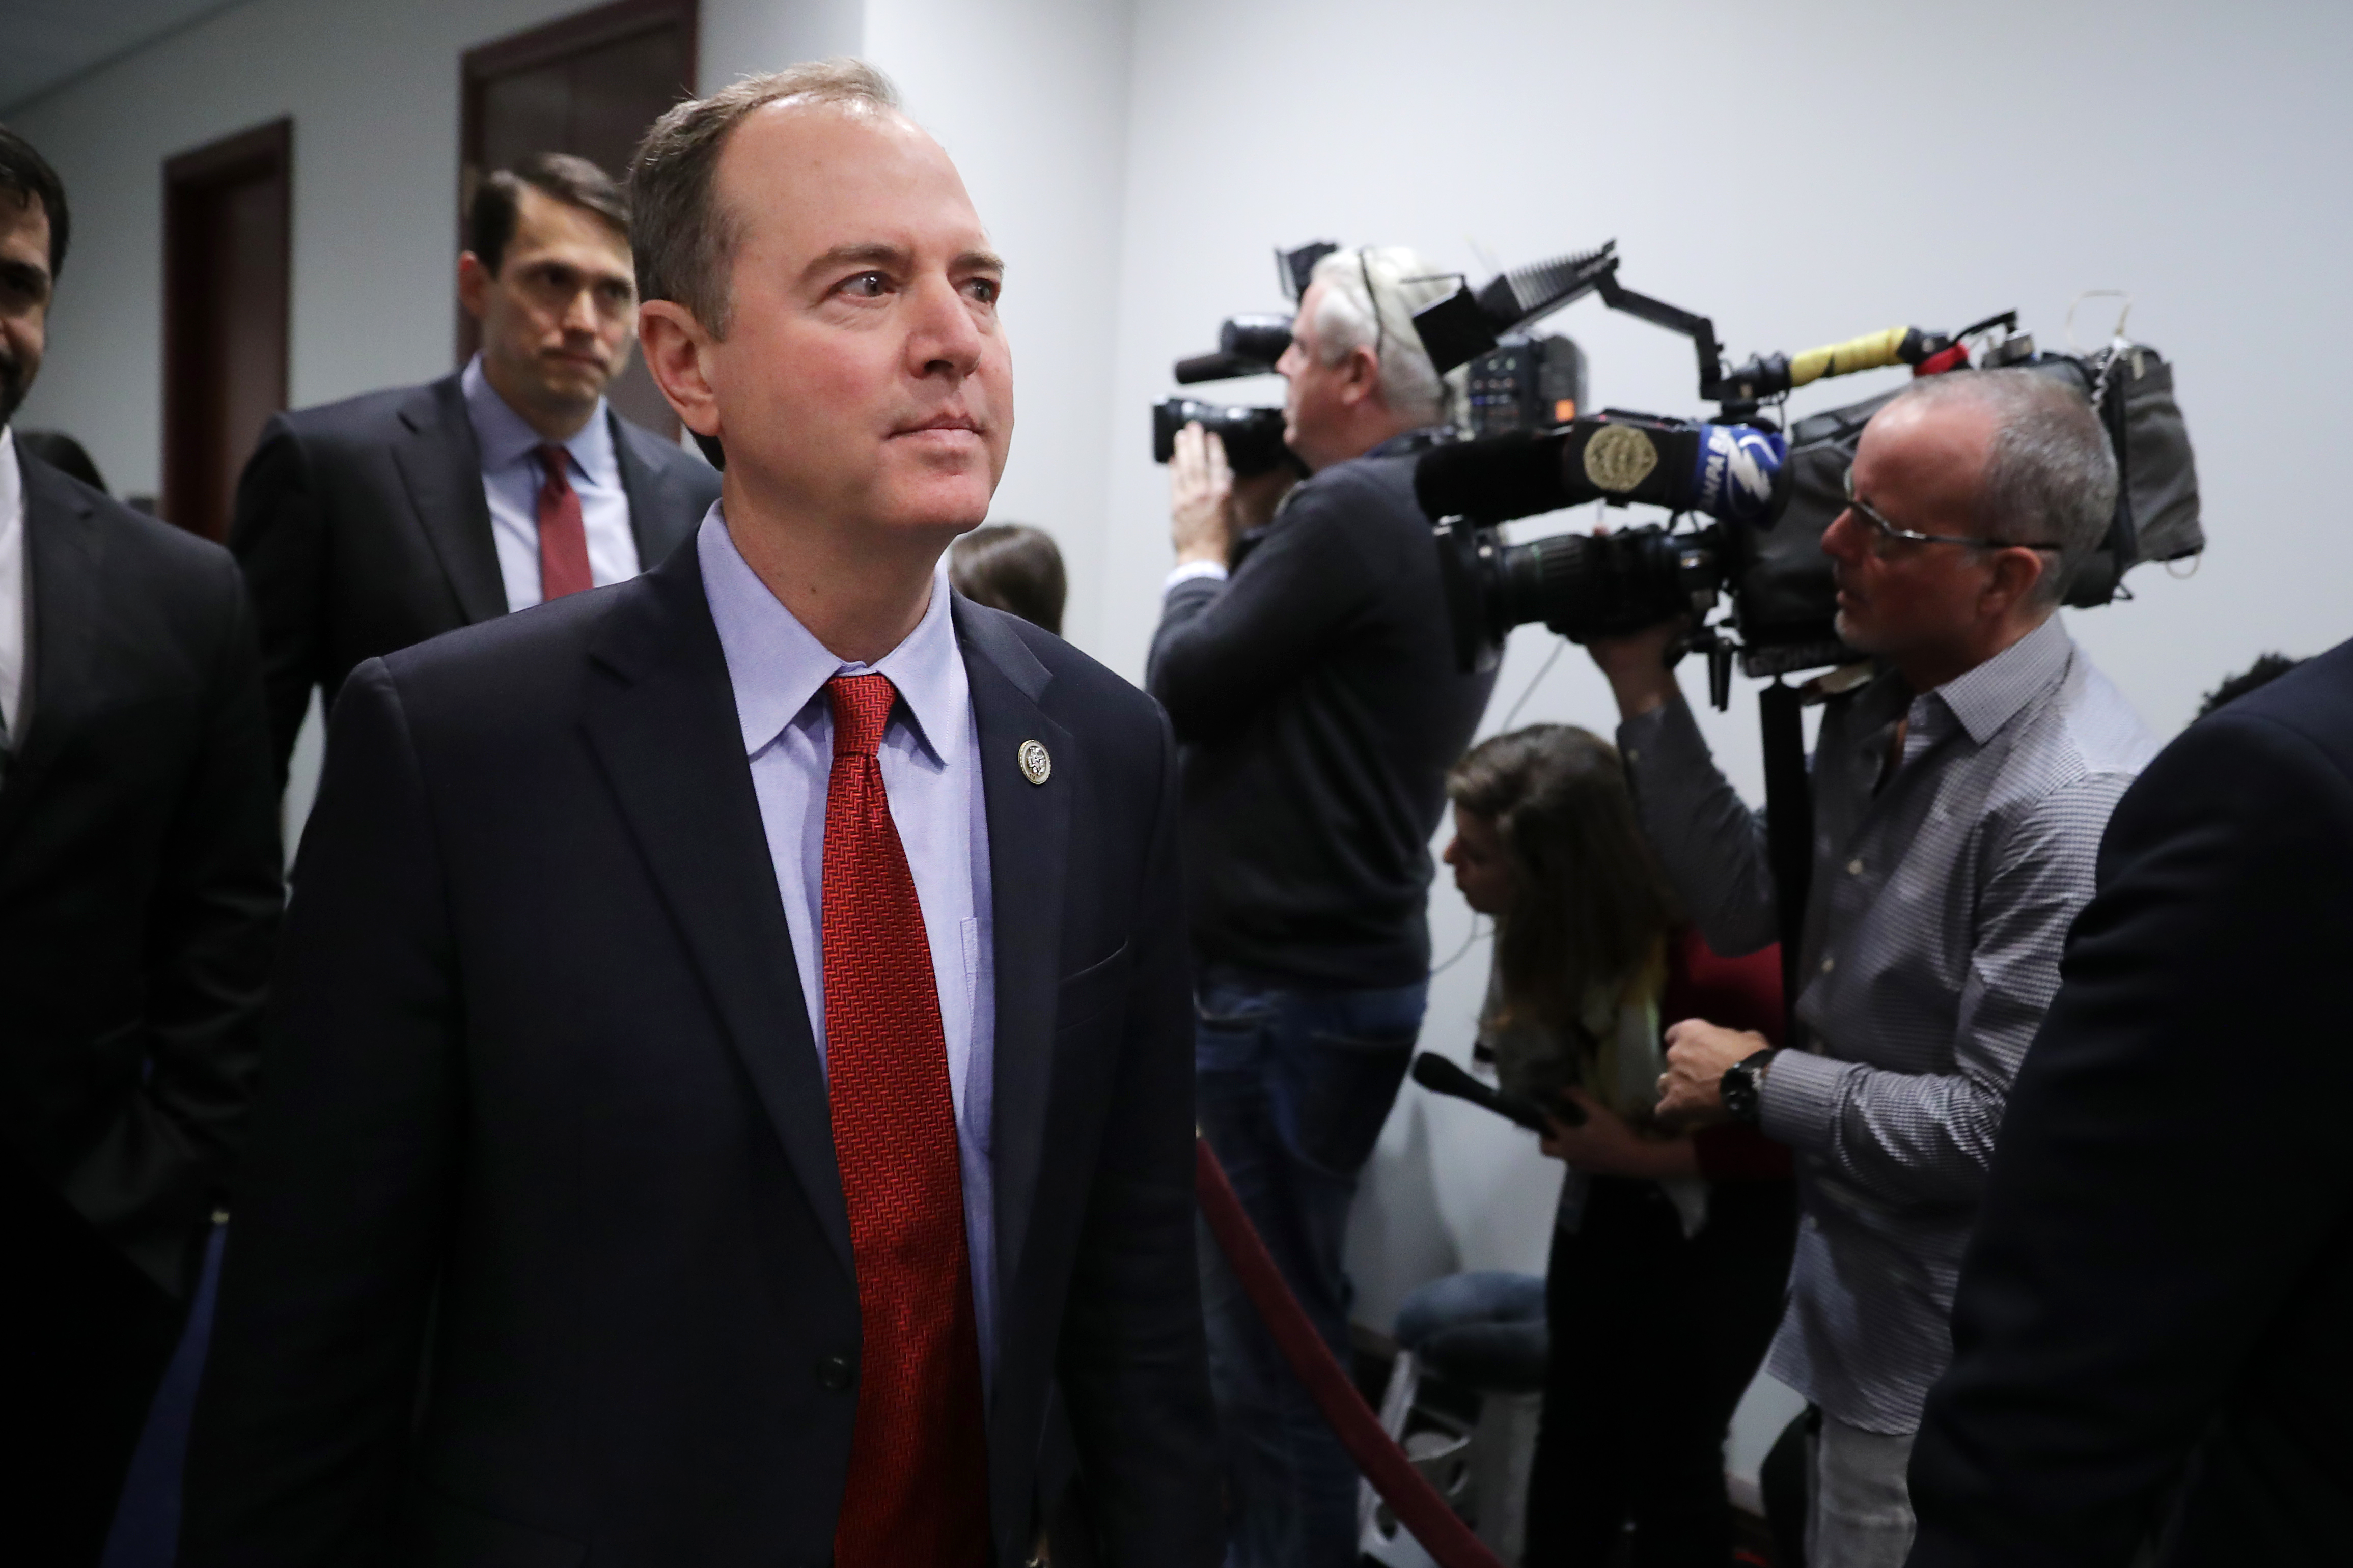 House Intelligence Committee ranking member Rep. Adam Schiff (D-CA) arrives for a Democratic caucus meeting in the U.S. Capitol Visitors Center November 14, 2018 in Washington, DC. (Photo by Chip Somodevilla/Getty Images)